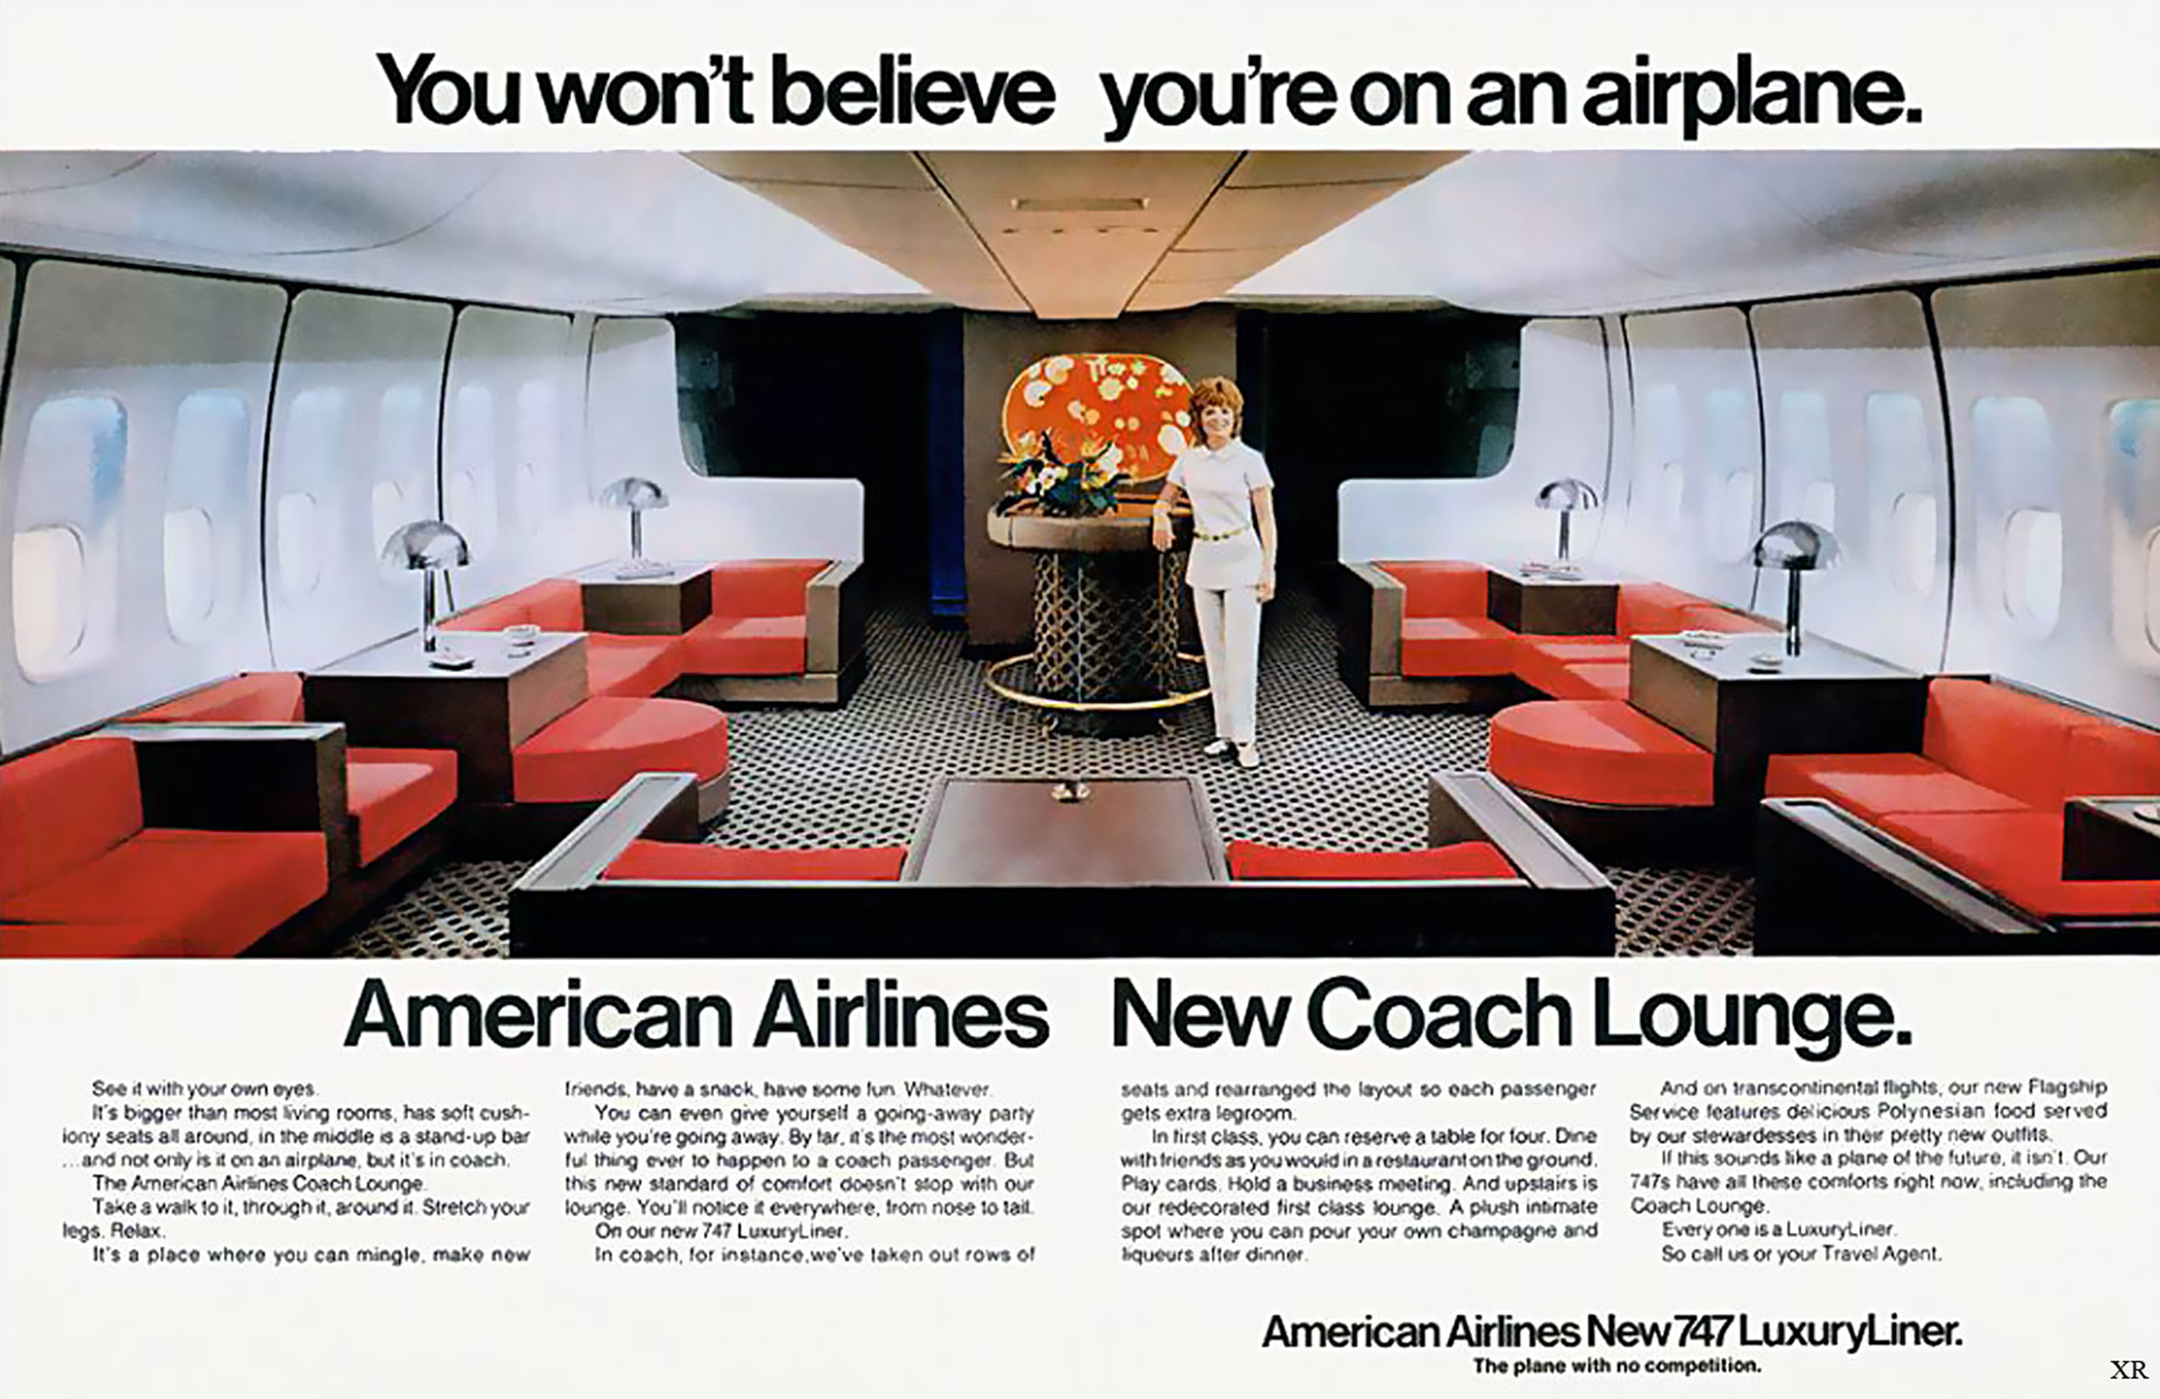 Advertisement from 1971 showing a conceptual illustration of an expansive, living room-like coach cabin in an airplane